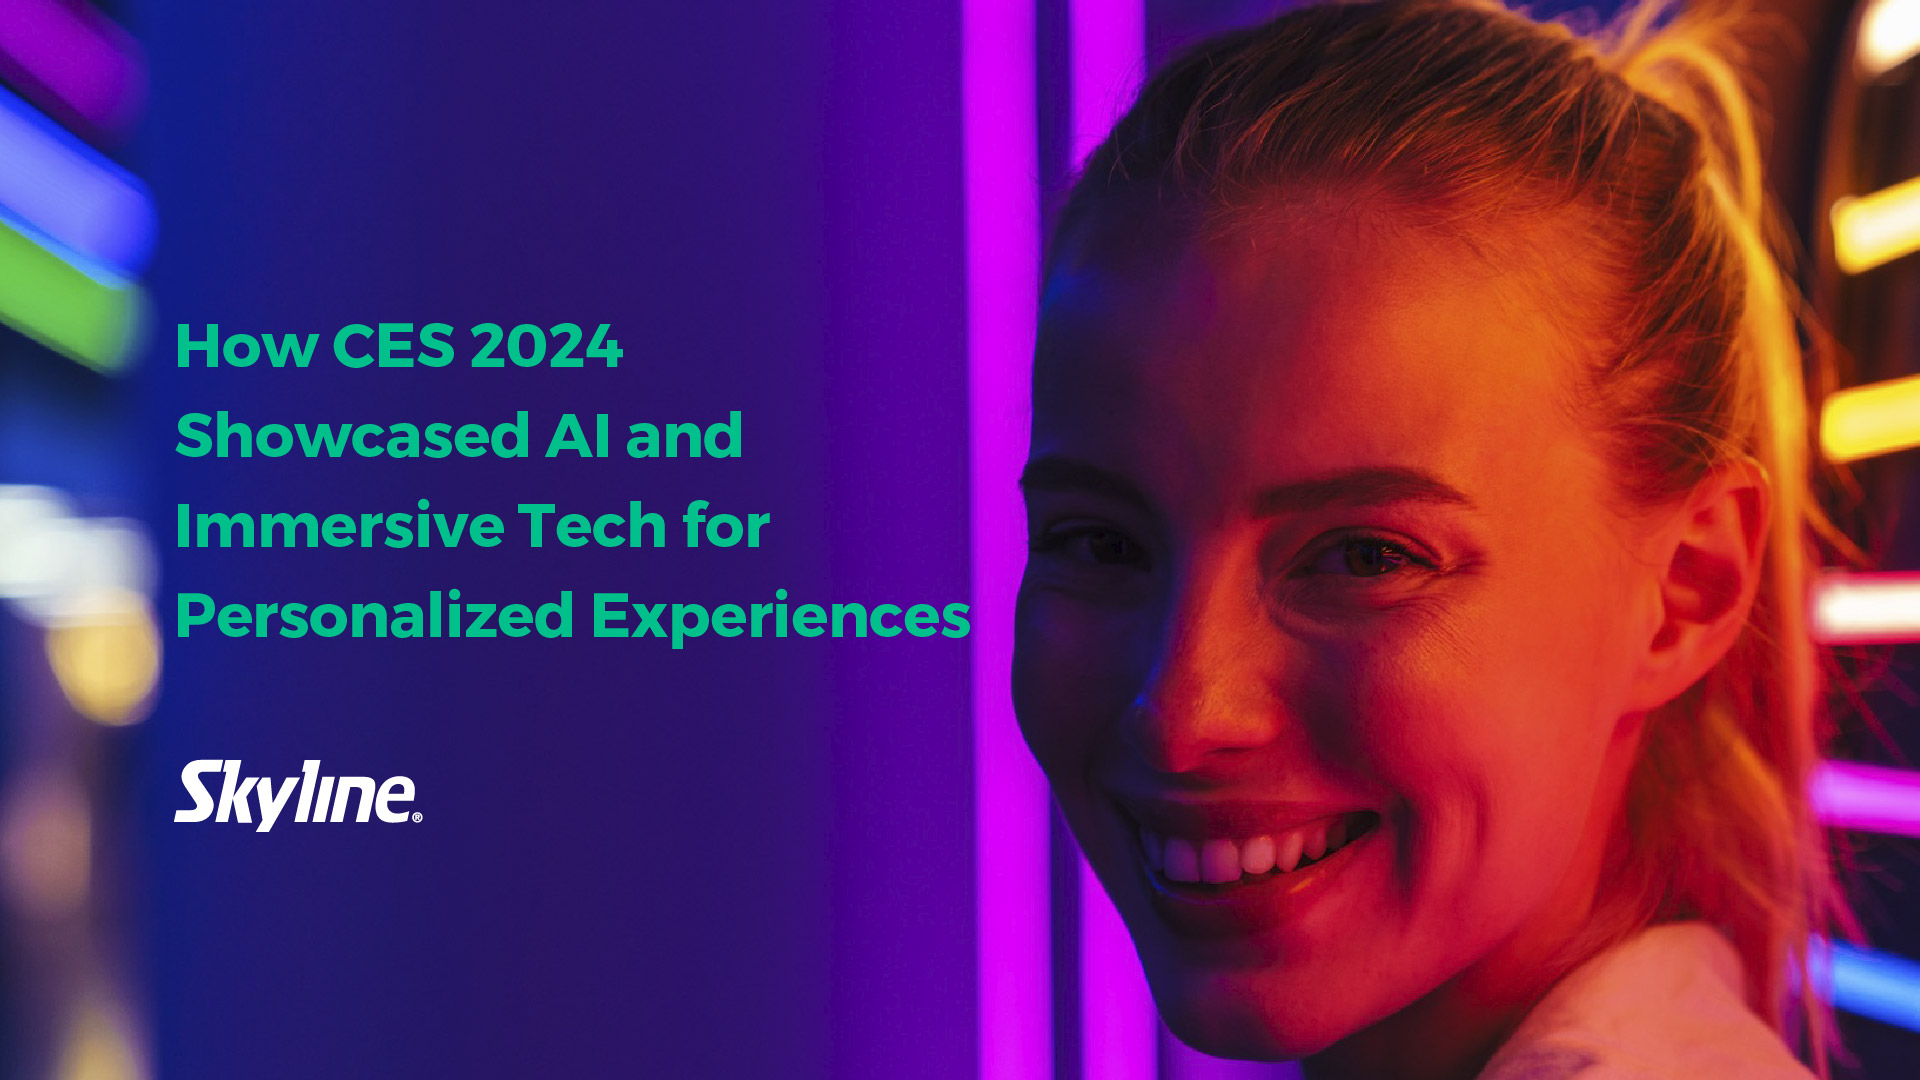  How CES 2024 Showcased AI and Immersive Tech for Personalized Experiences 